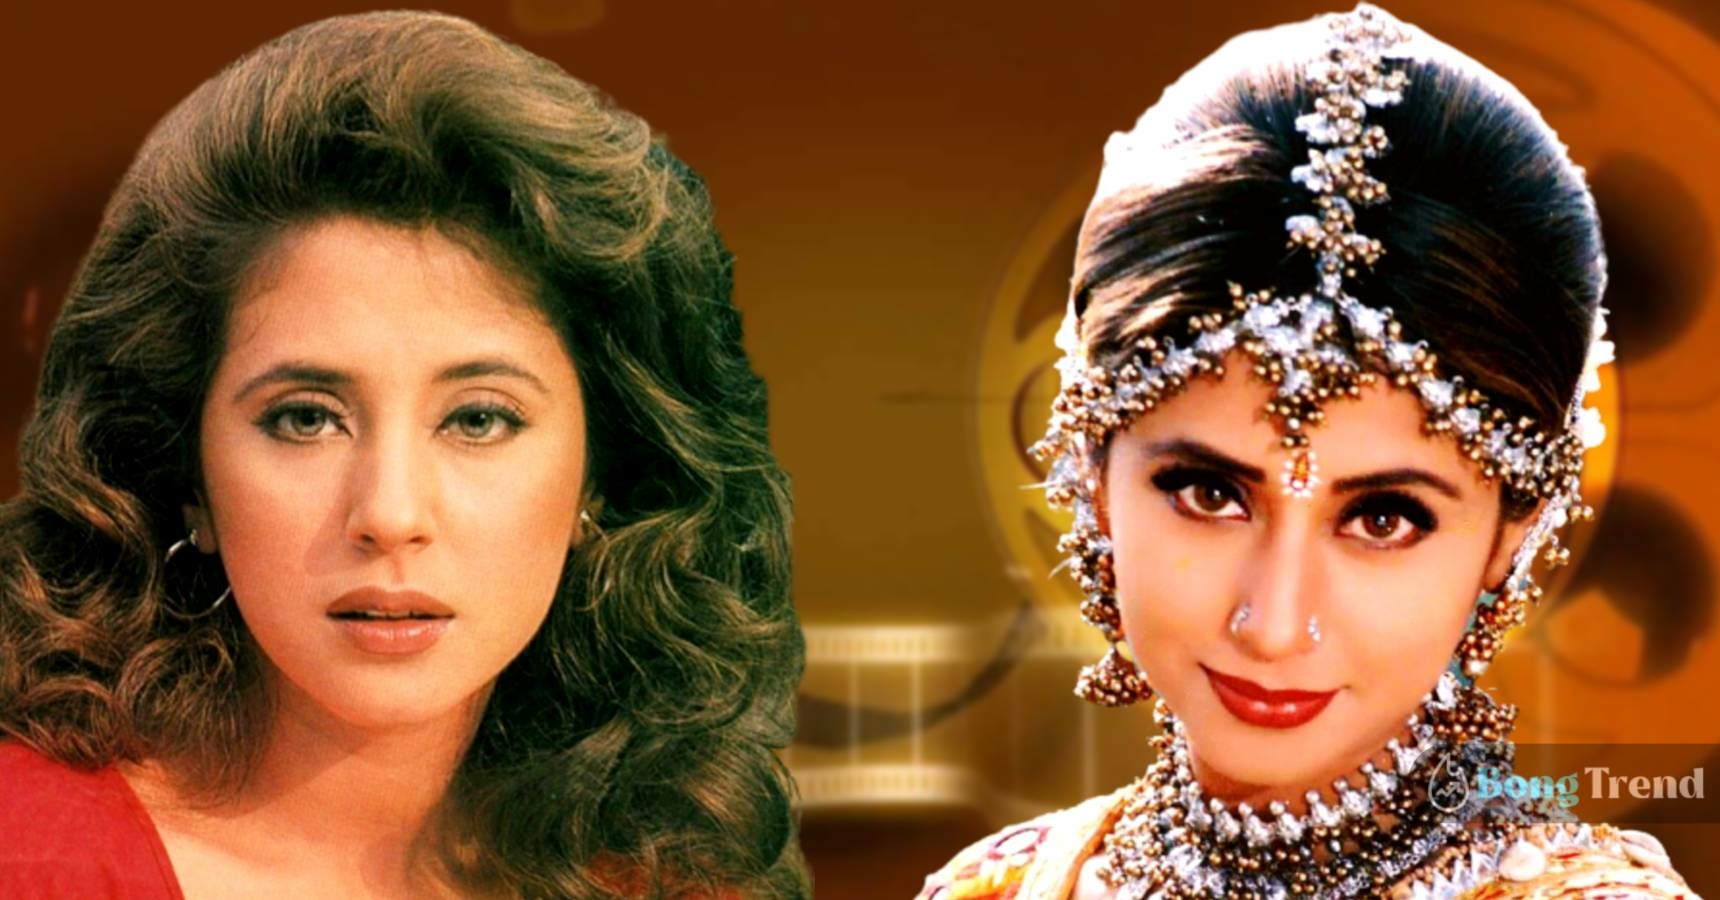 All you need to know about famous Bollywood actress Urmila Matondkar